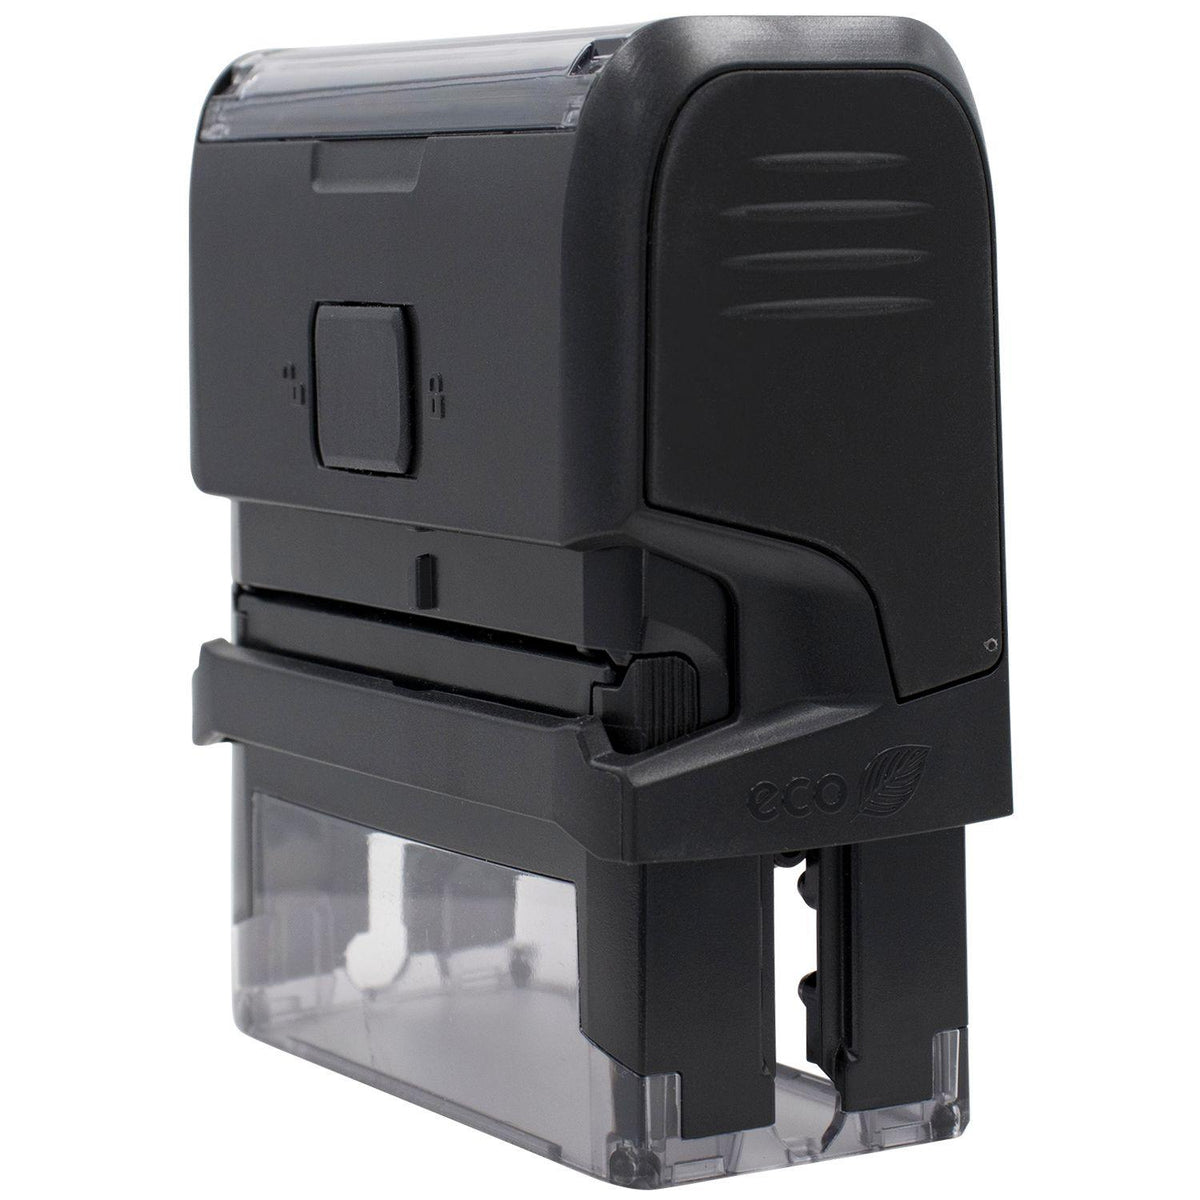 Large Self Inking Not Approved For Construction Stamp - Engineer Seal Stamps - Brand_Trodat, Impression Size_Large, Stamp Type_Self-Inking Stamp, Type of Use_Professional